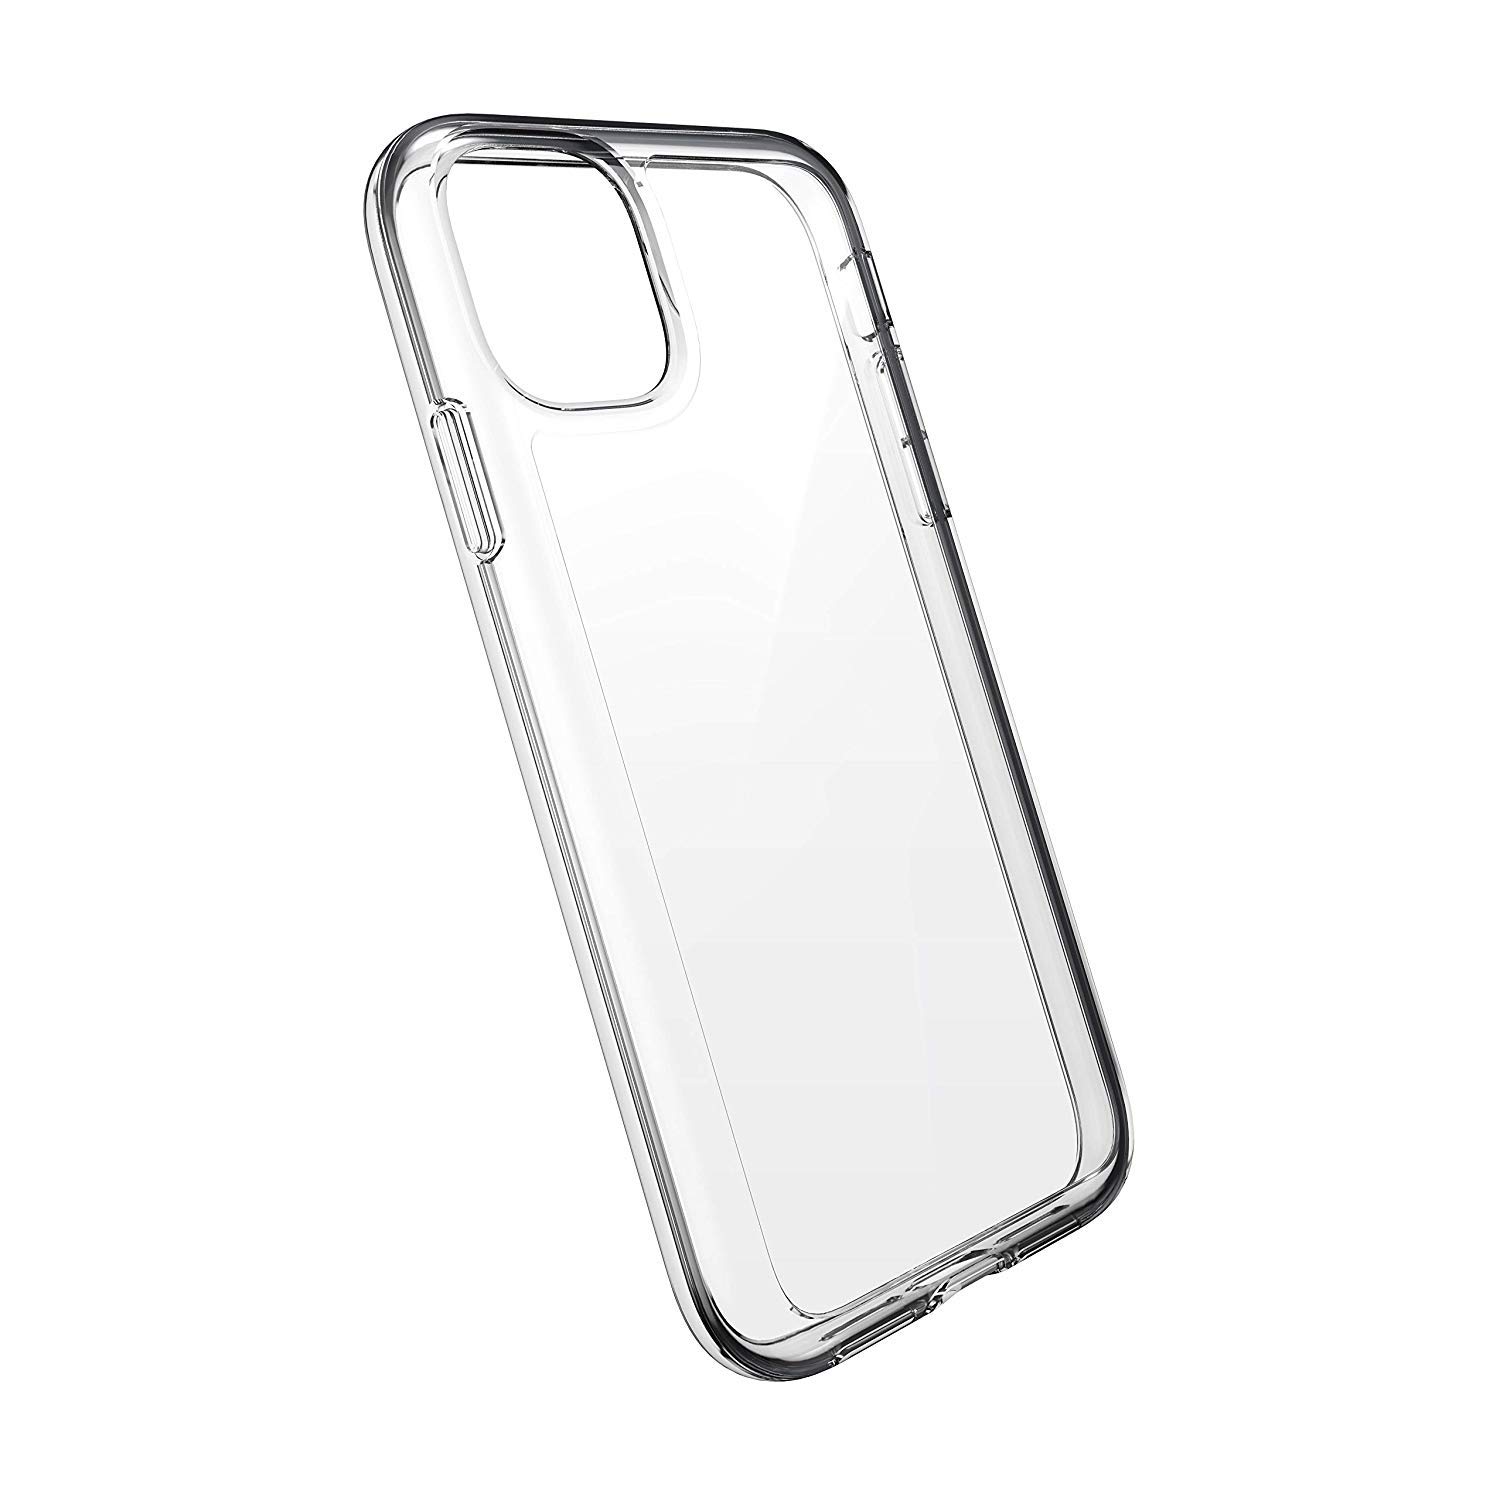 The best clear cases for iPhone 11 and iPhone 11 Pro